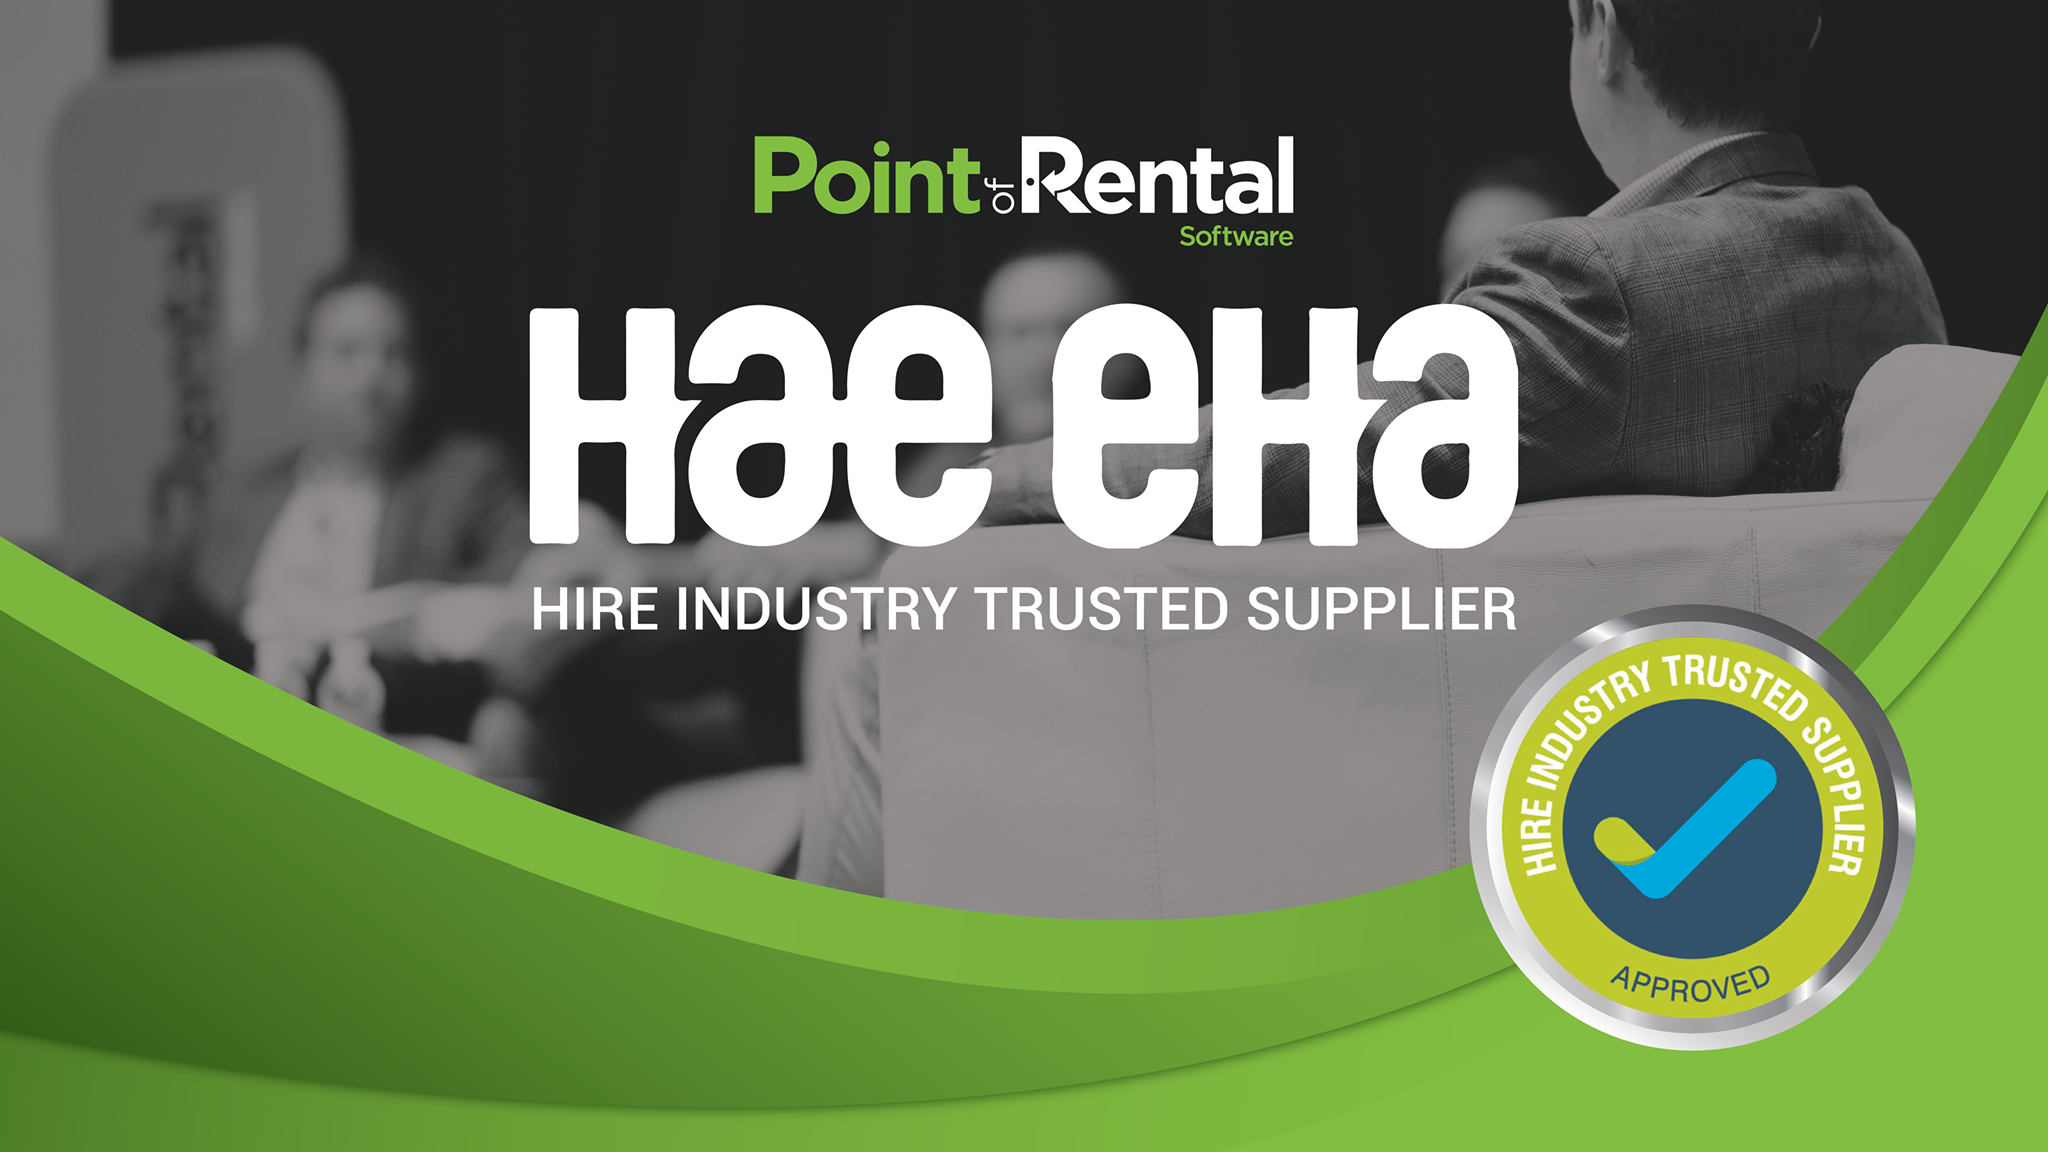 Point of Rental Software is now HITs certified by HAE EHA.